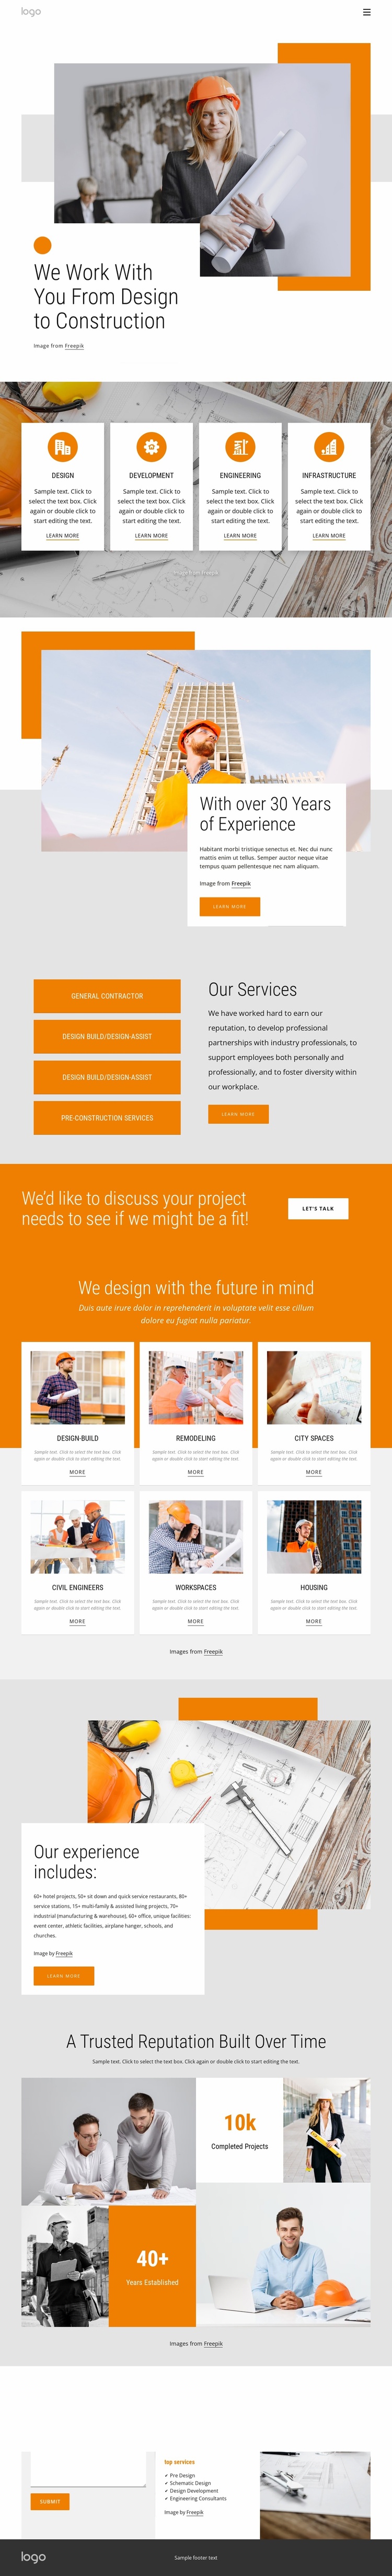 From design to construction Landing Page